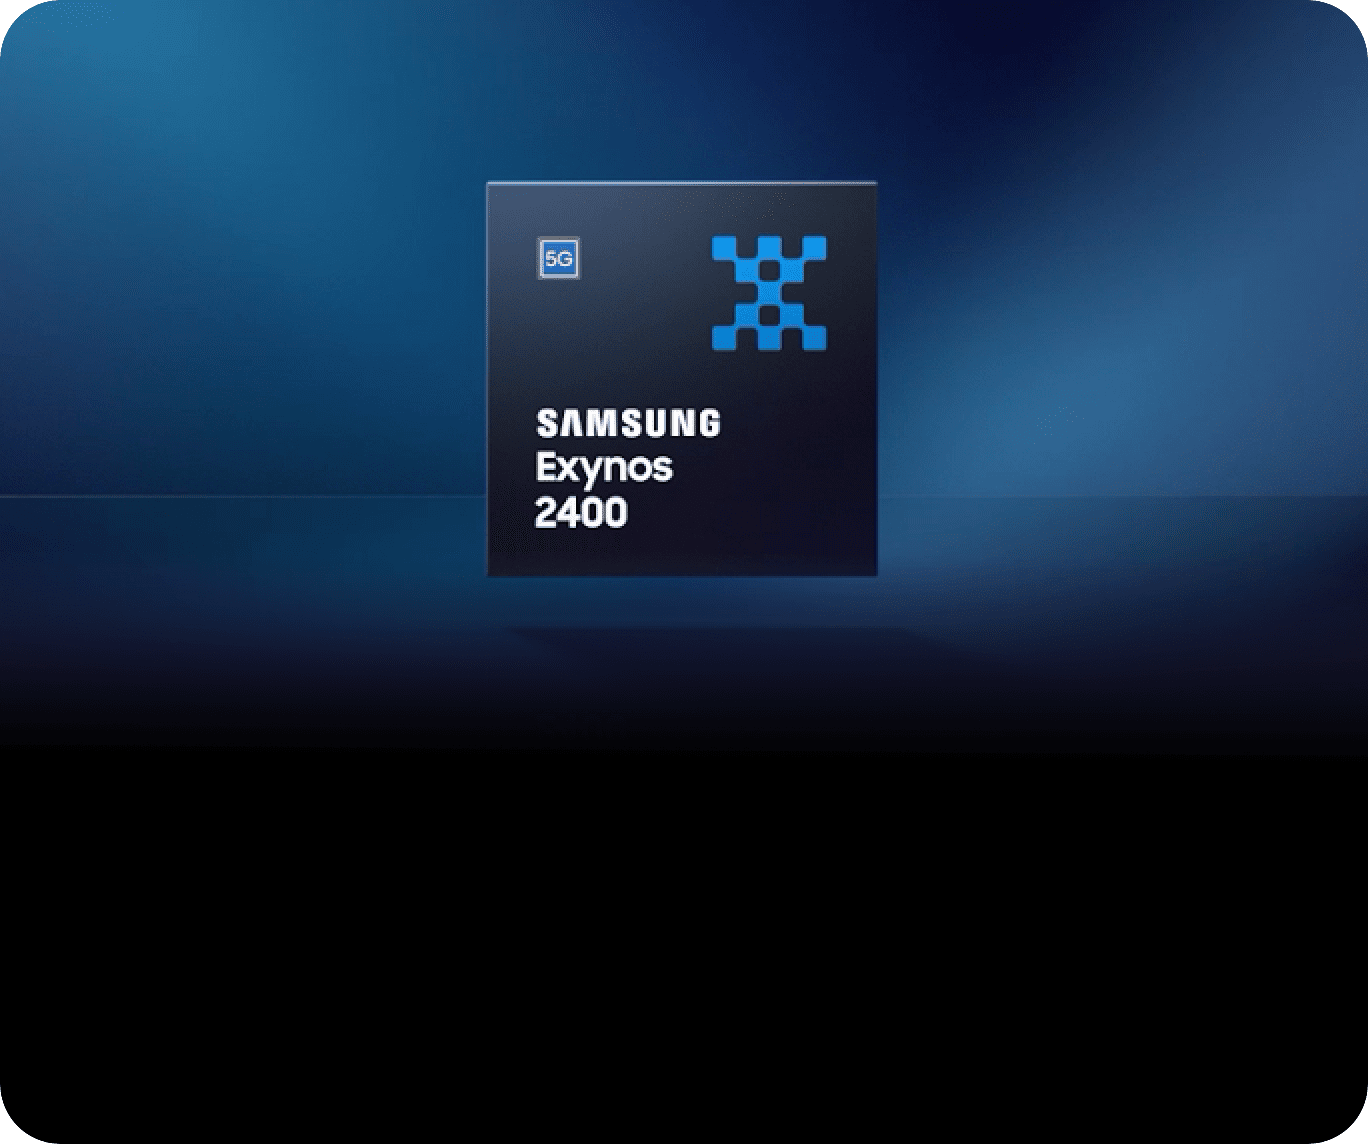 This is an image of Samsung Exynos 2400.